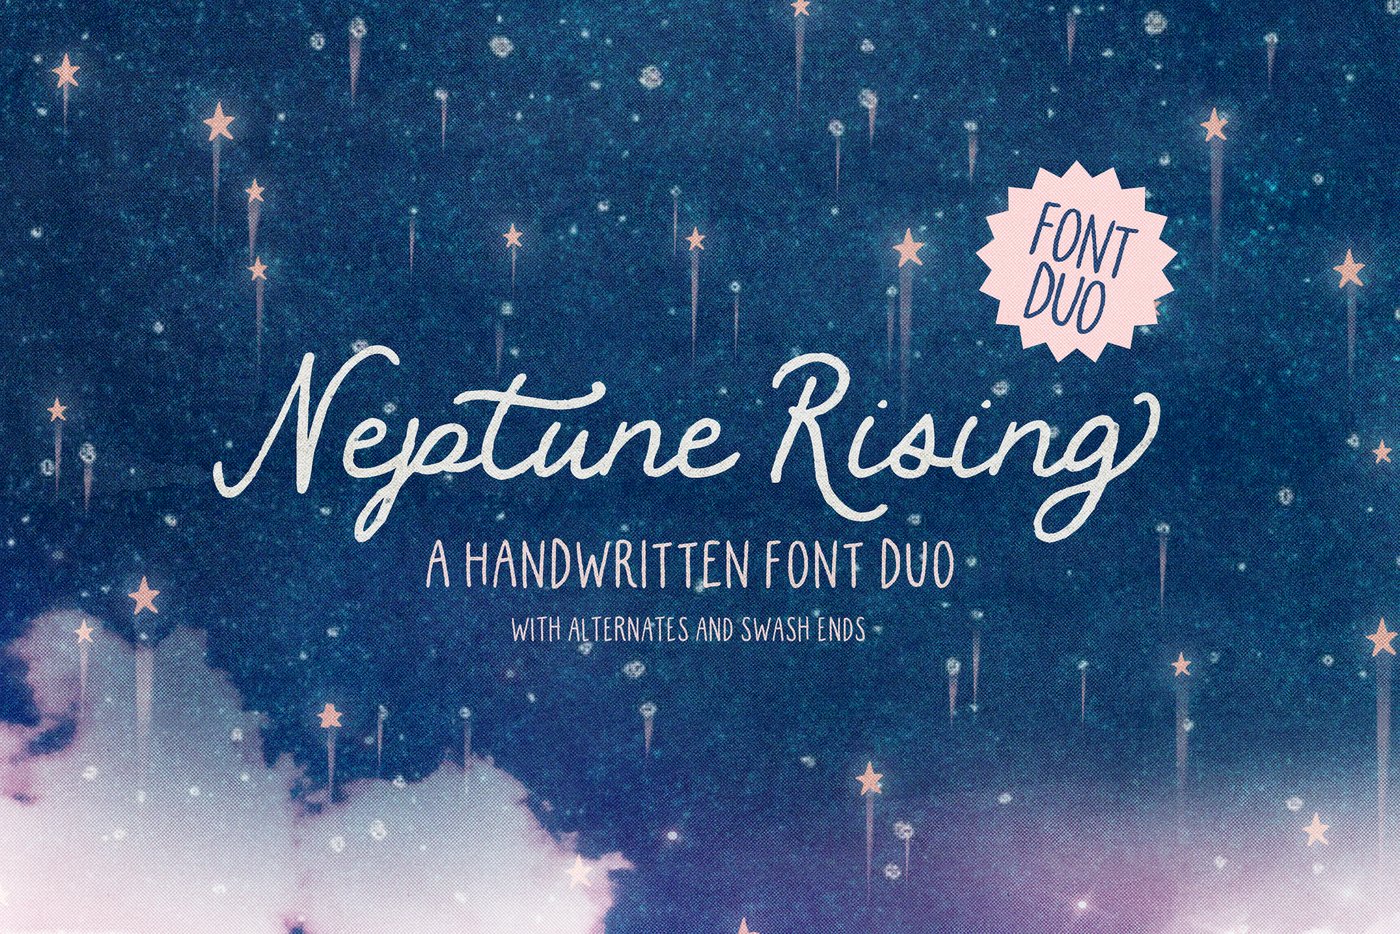 Neptune Rising Font Duo main product image by Nicky Laatz